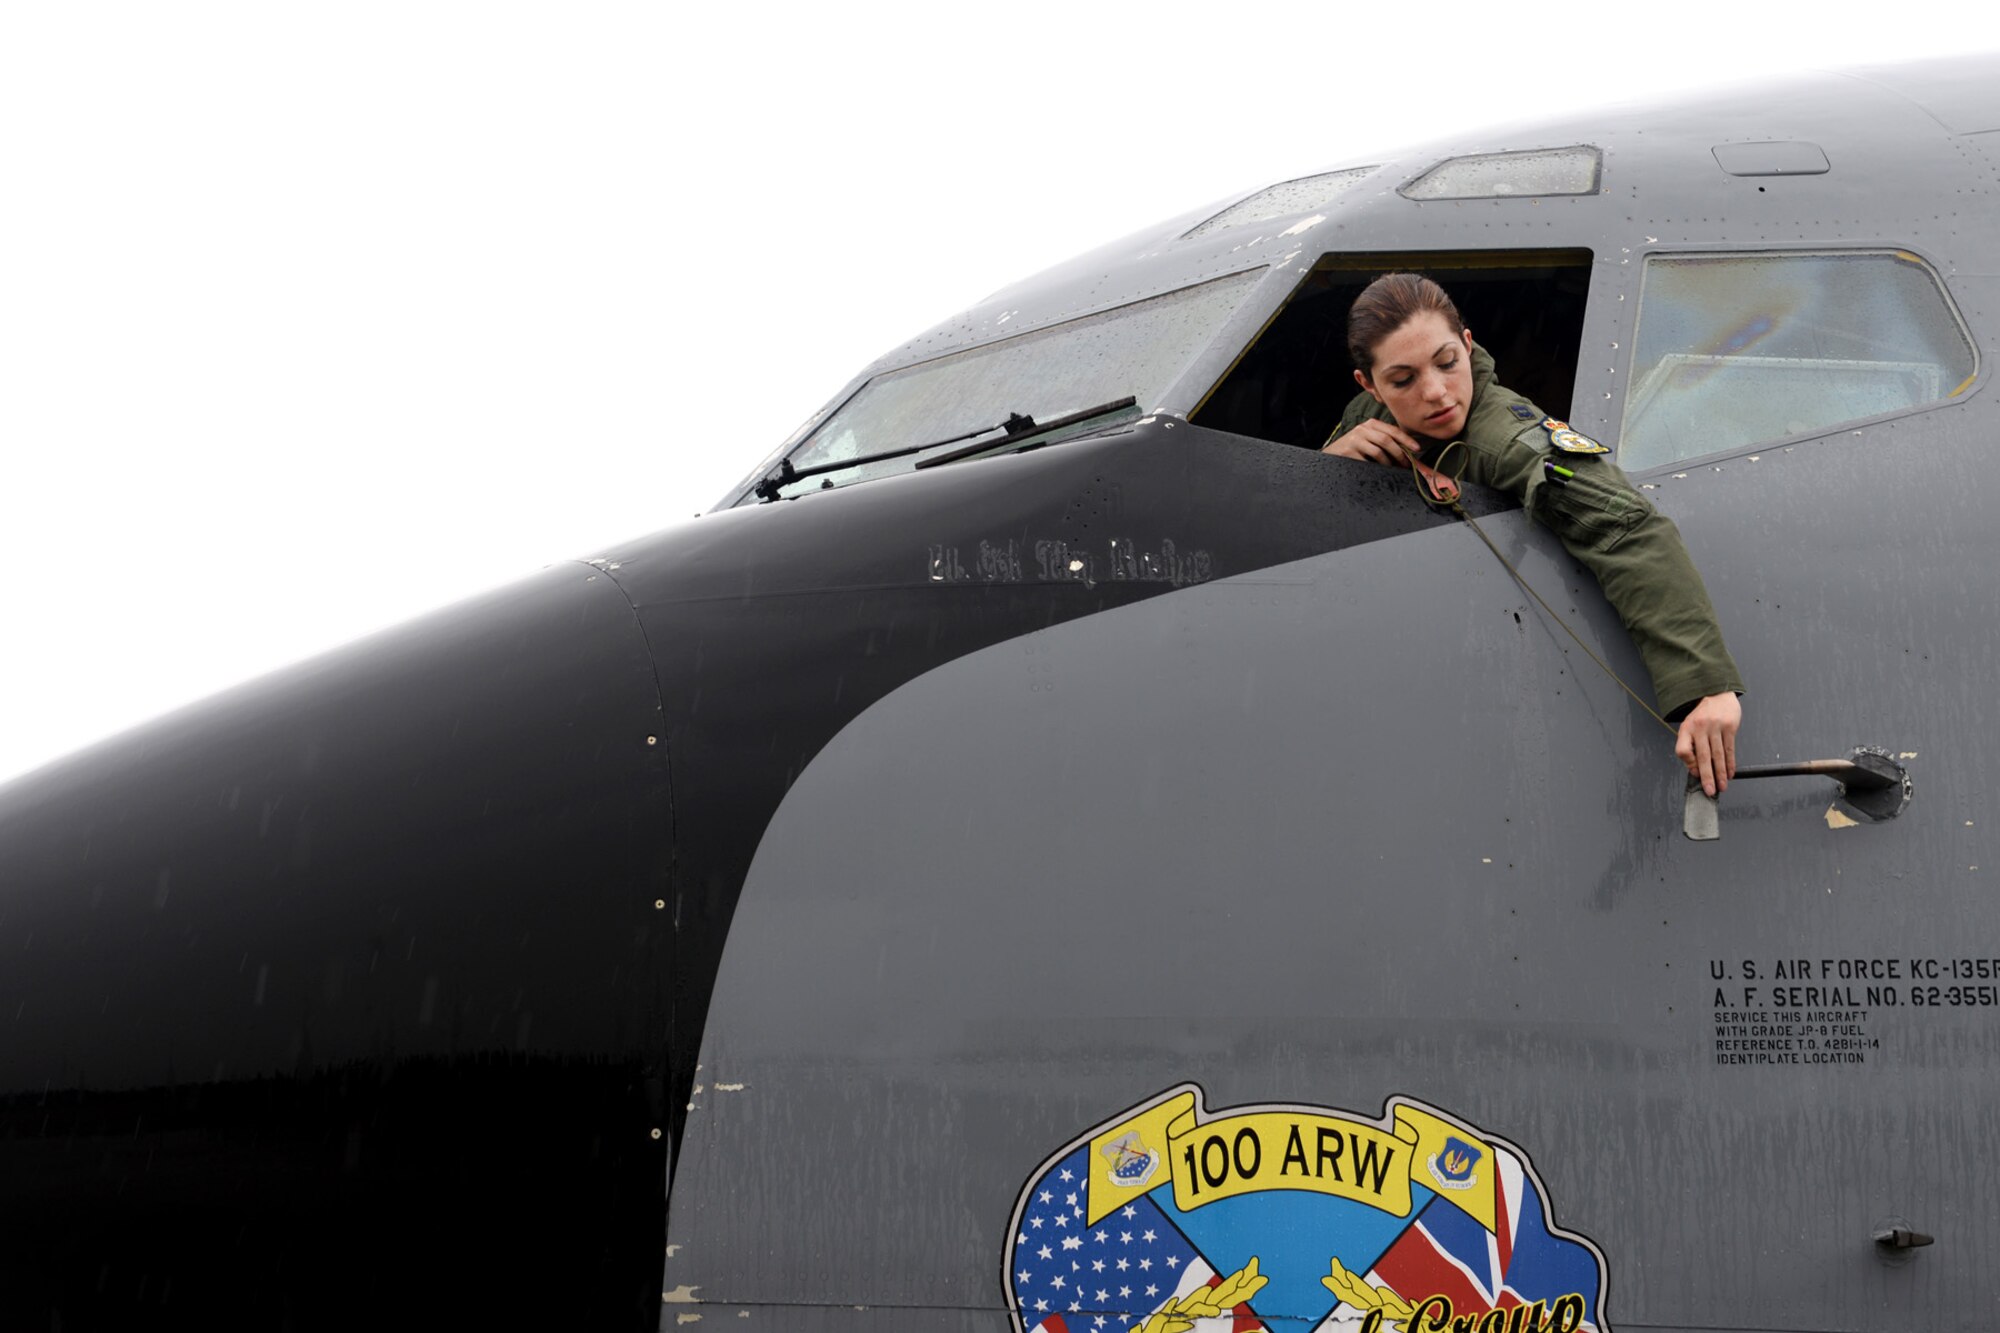 U.S. Air Force Capt. Shannon Murphy, 351st Air Refueling Squadron KC-135 Stratotanker pilot from Ossining, N.Y., performs a post-flight checklist after landing June 24, 2015, during air refueling familiarization training on Kecskemét air base, Hungary. Hungarian, U.S. and Swedish air force personnel met for a two-week familiarization period enabling the Hungarian JAS-39 Gripen pilots to successfully perform air refueling for the first time. (U.S. Air Force photo by Senior Airman Kate Thornton/Released)